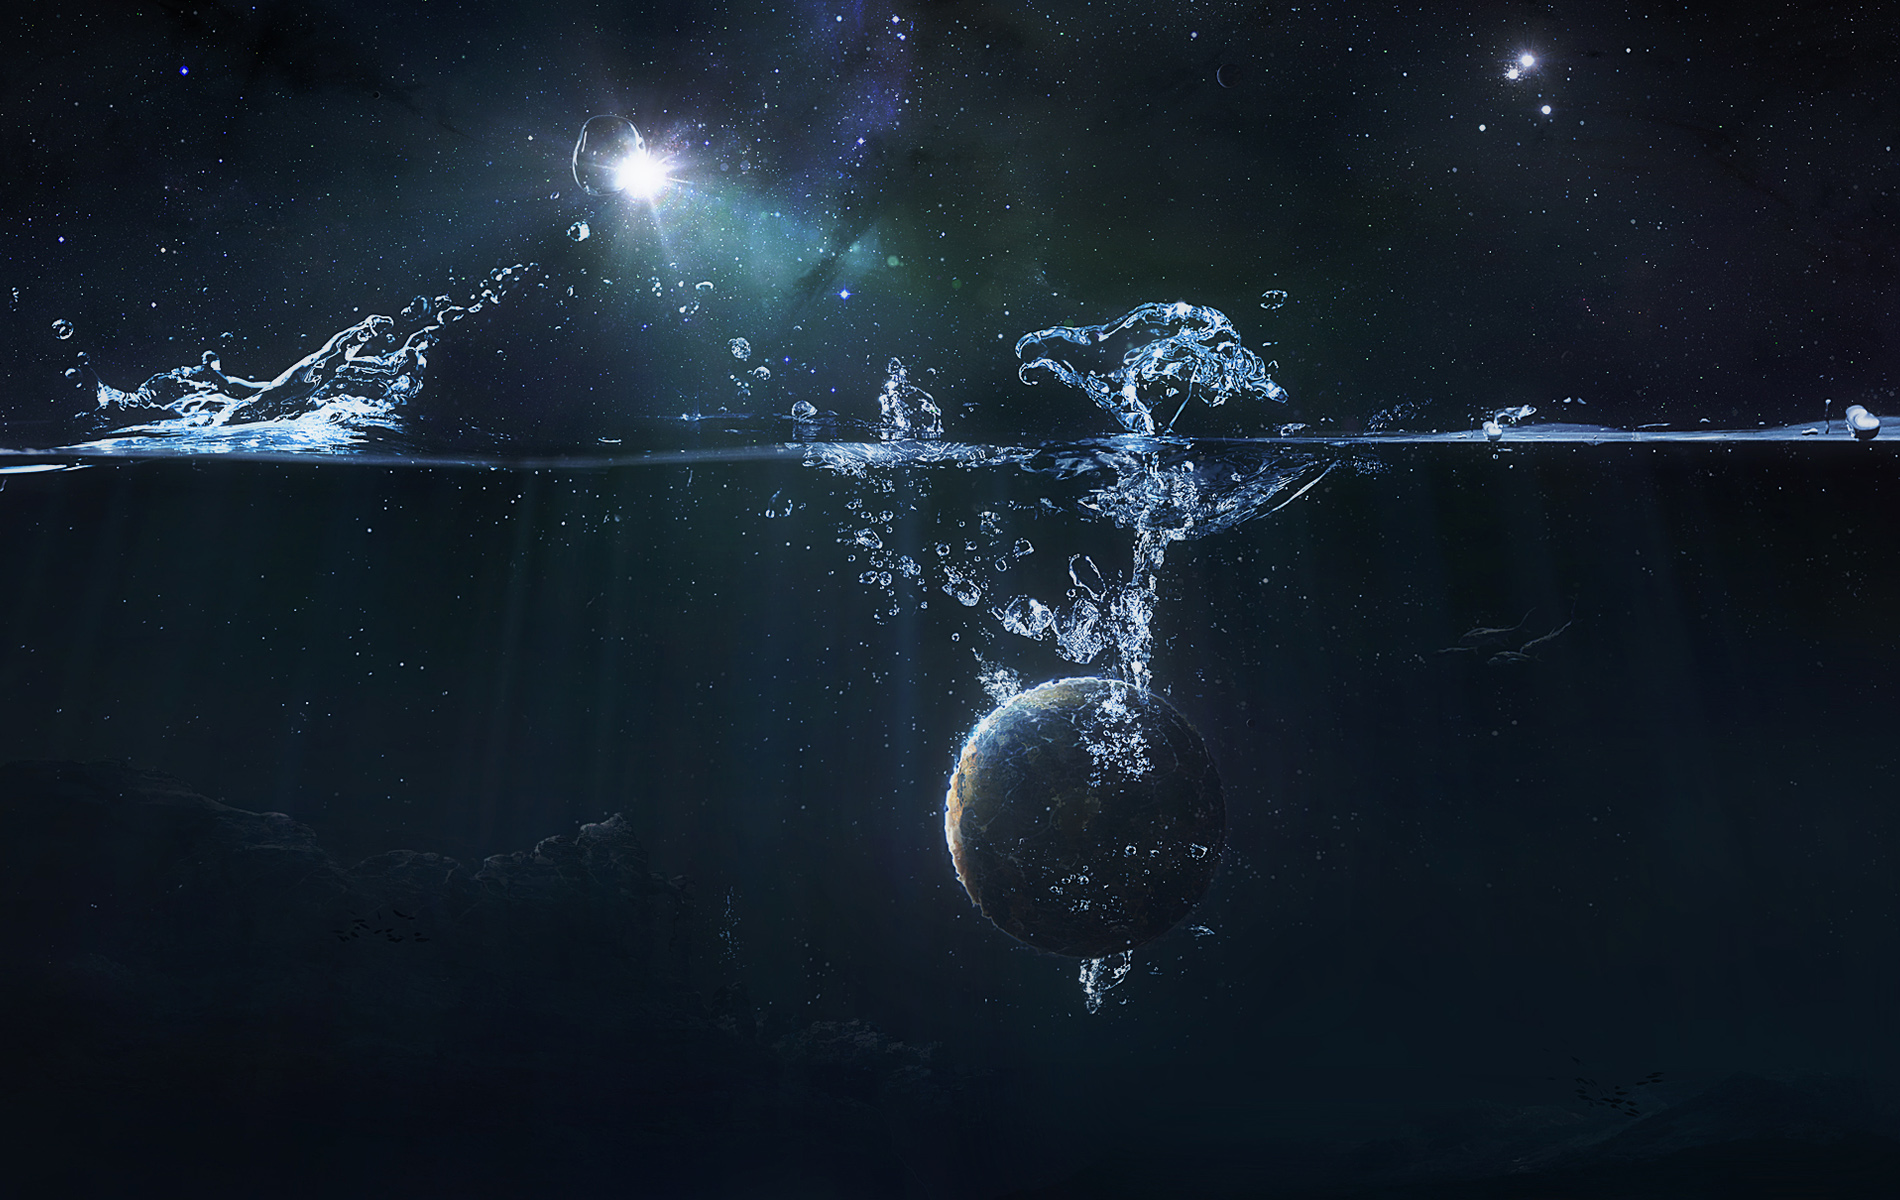 Universe full hd, hdtv, fhd, 1080p wallpapers hd, desktop backgrounds  1920x1080, images and pictures